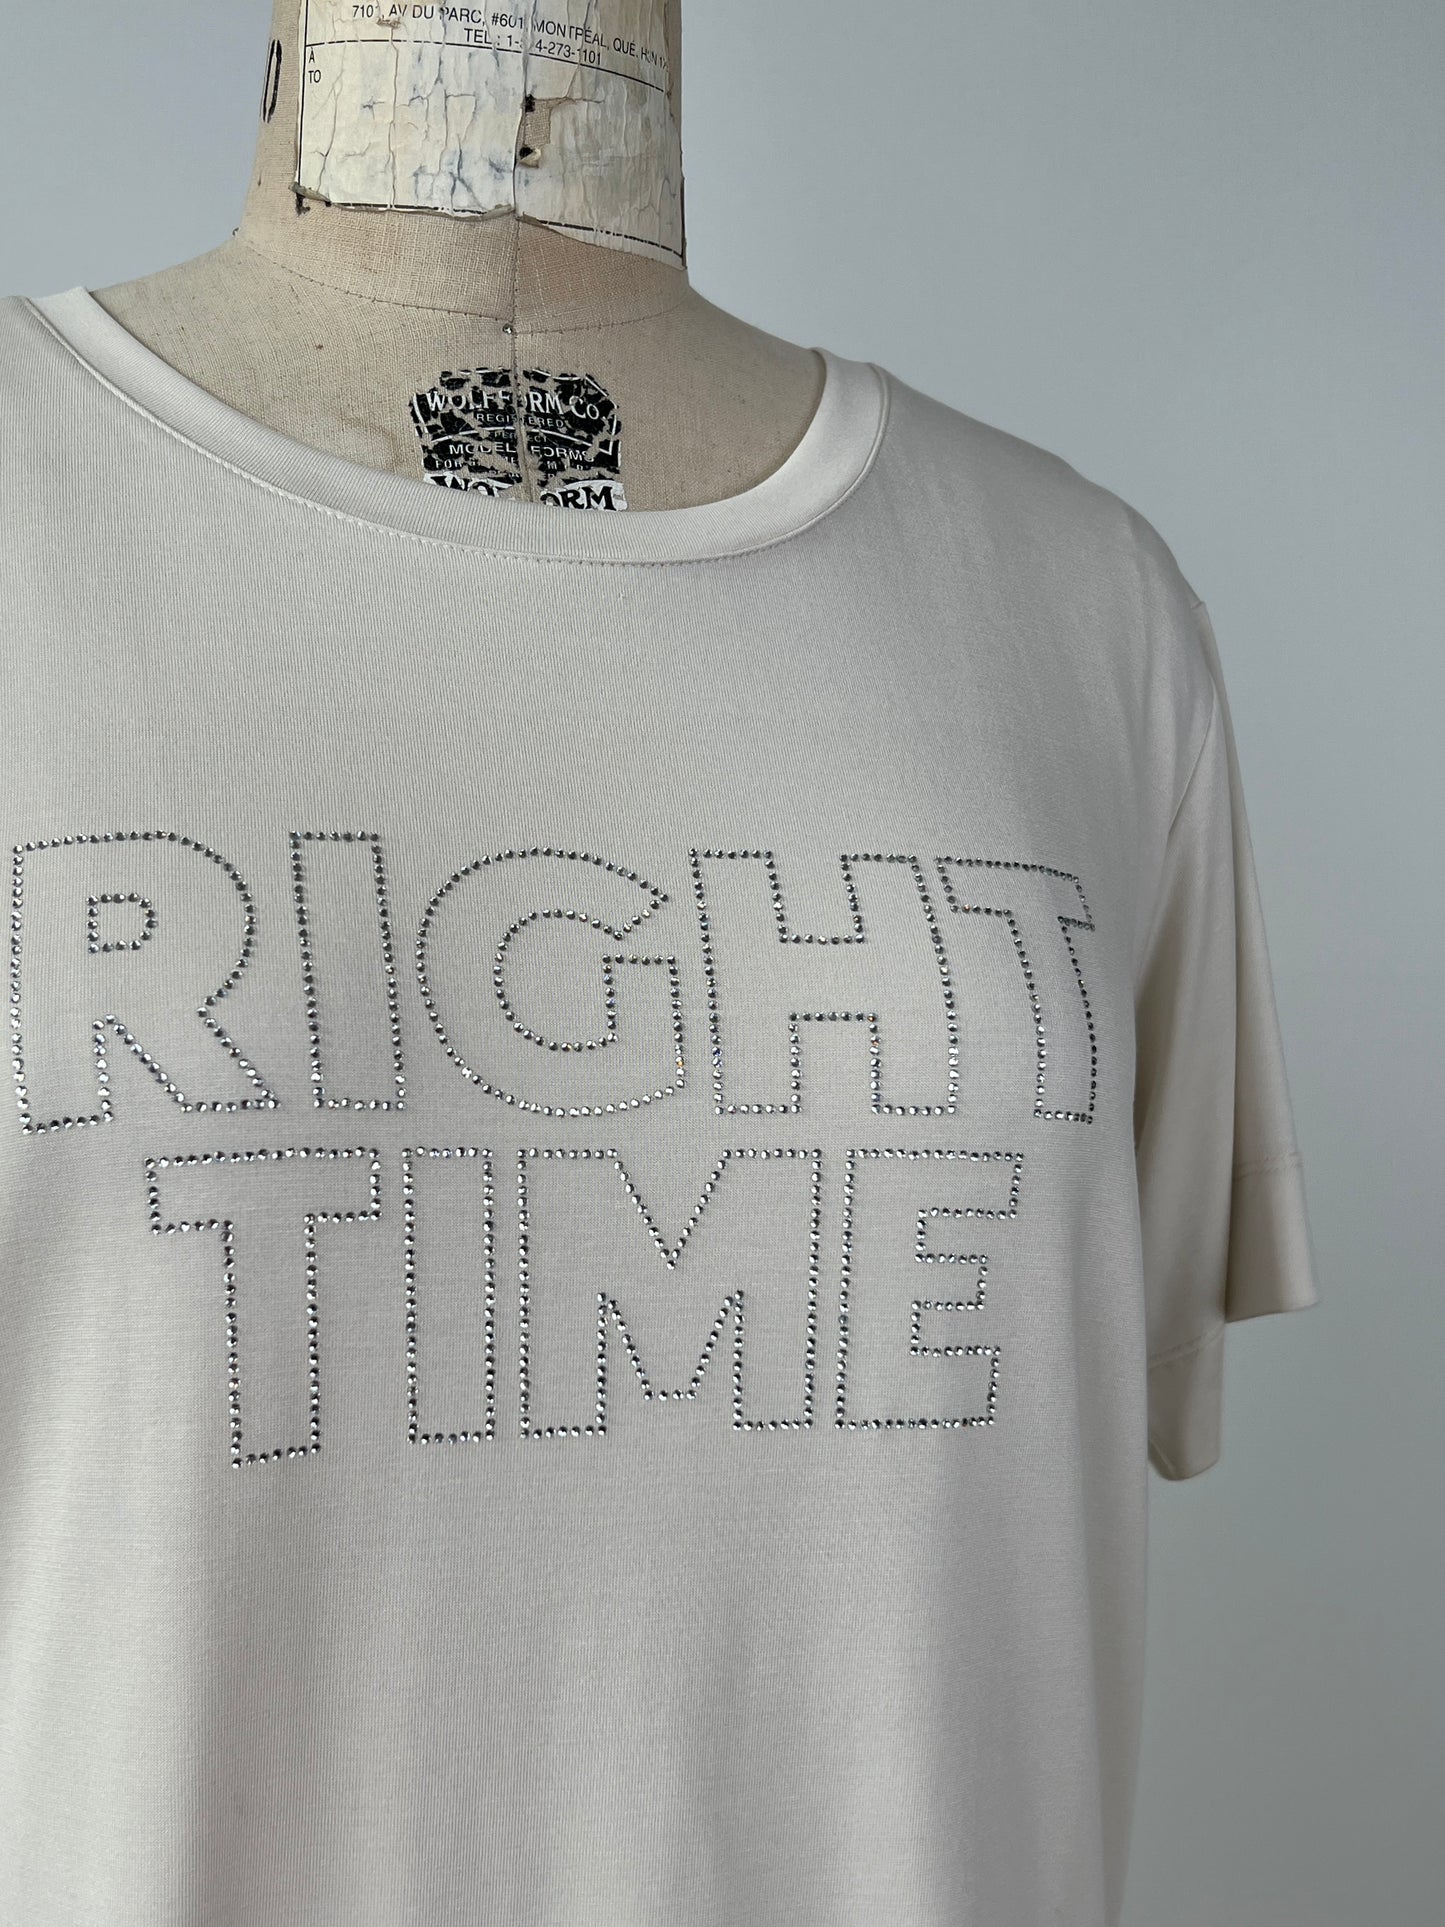 T-shirt ivoire à strass " RIGHT TIME" (6)